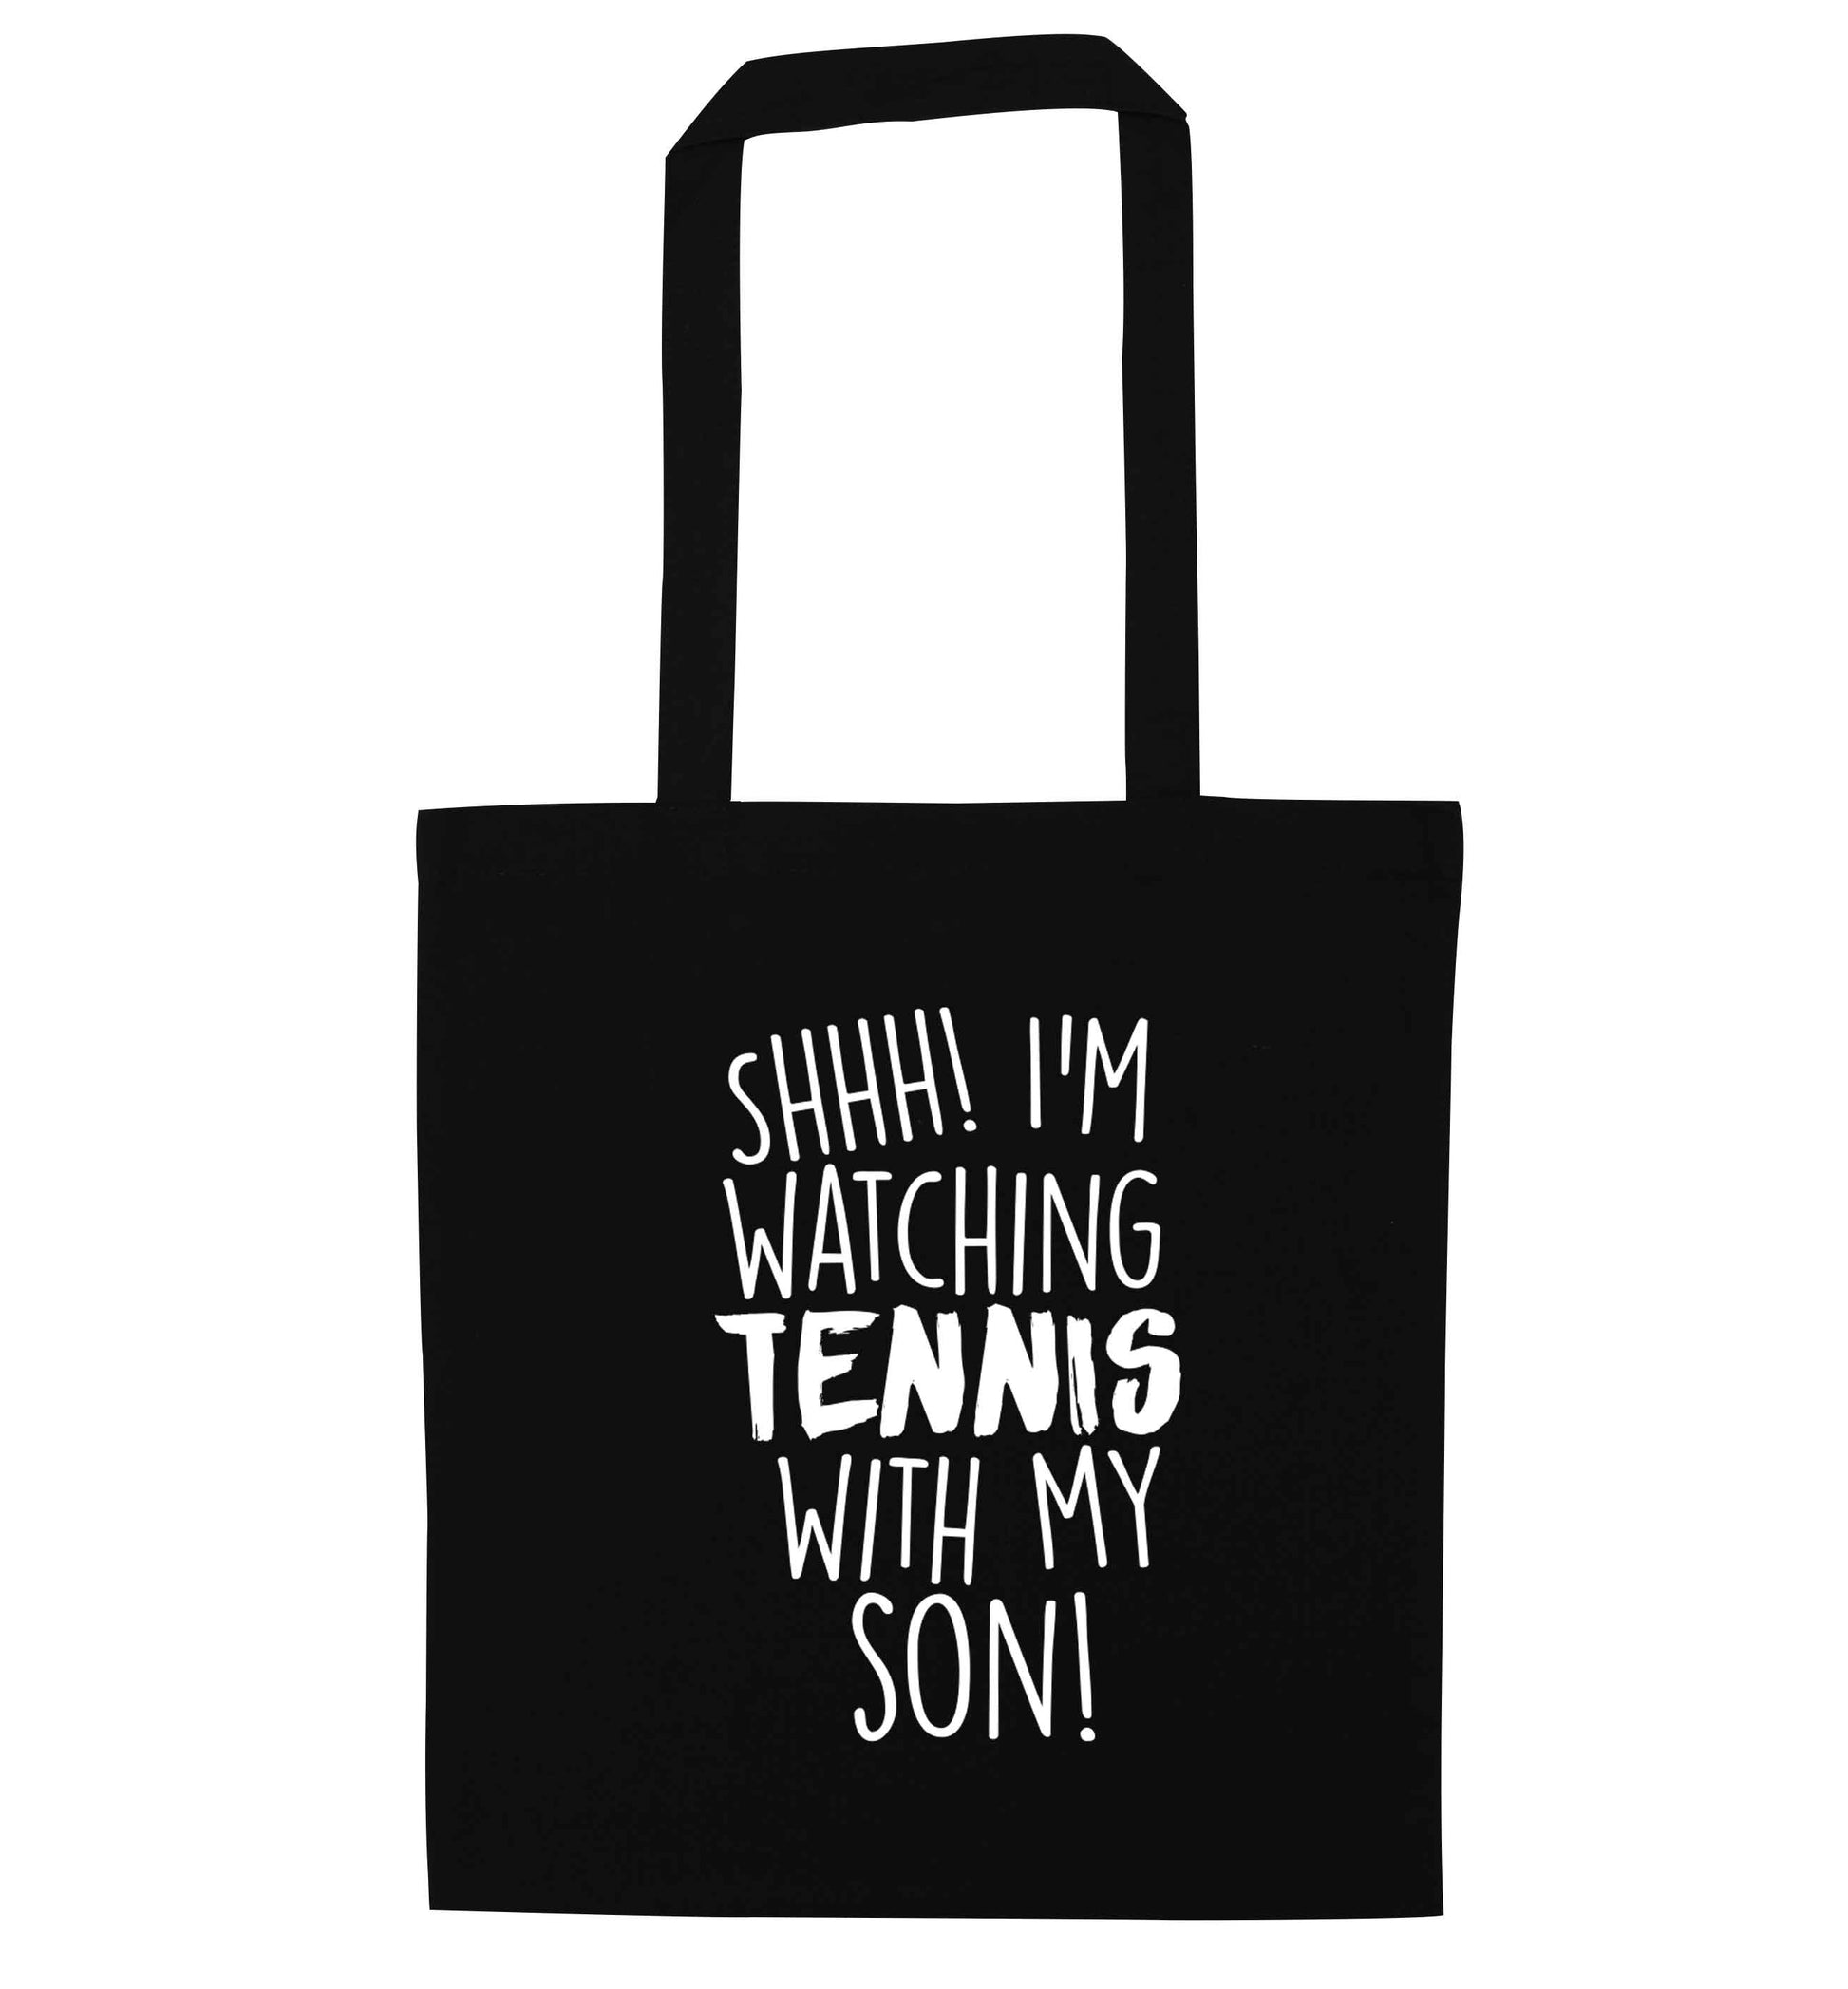 Shh! I'm watching tennis with my son! black tote bag